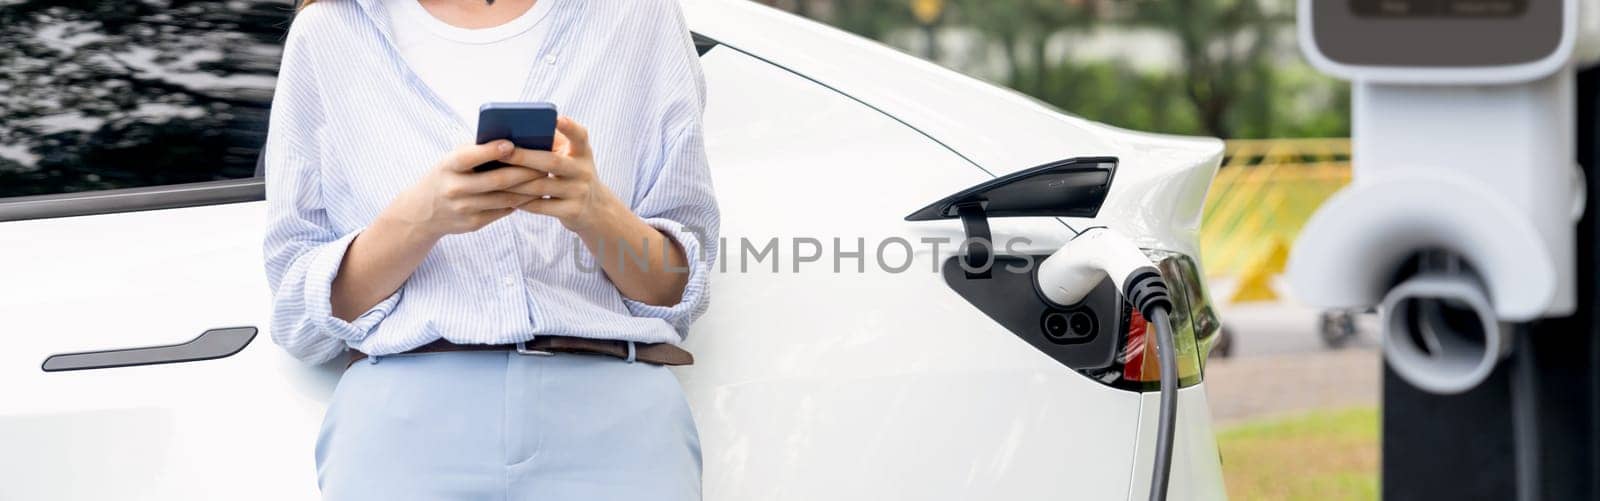 Young woman using smartphone to pay for electric car charging. Exalt by biancoblue